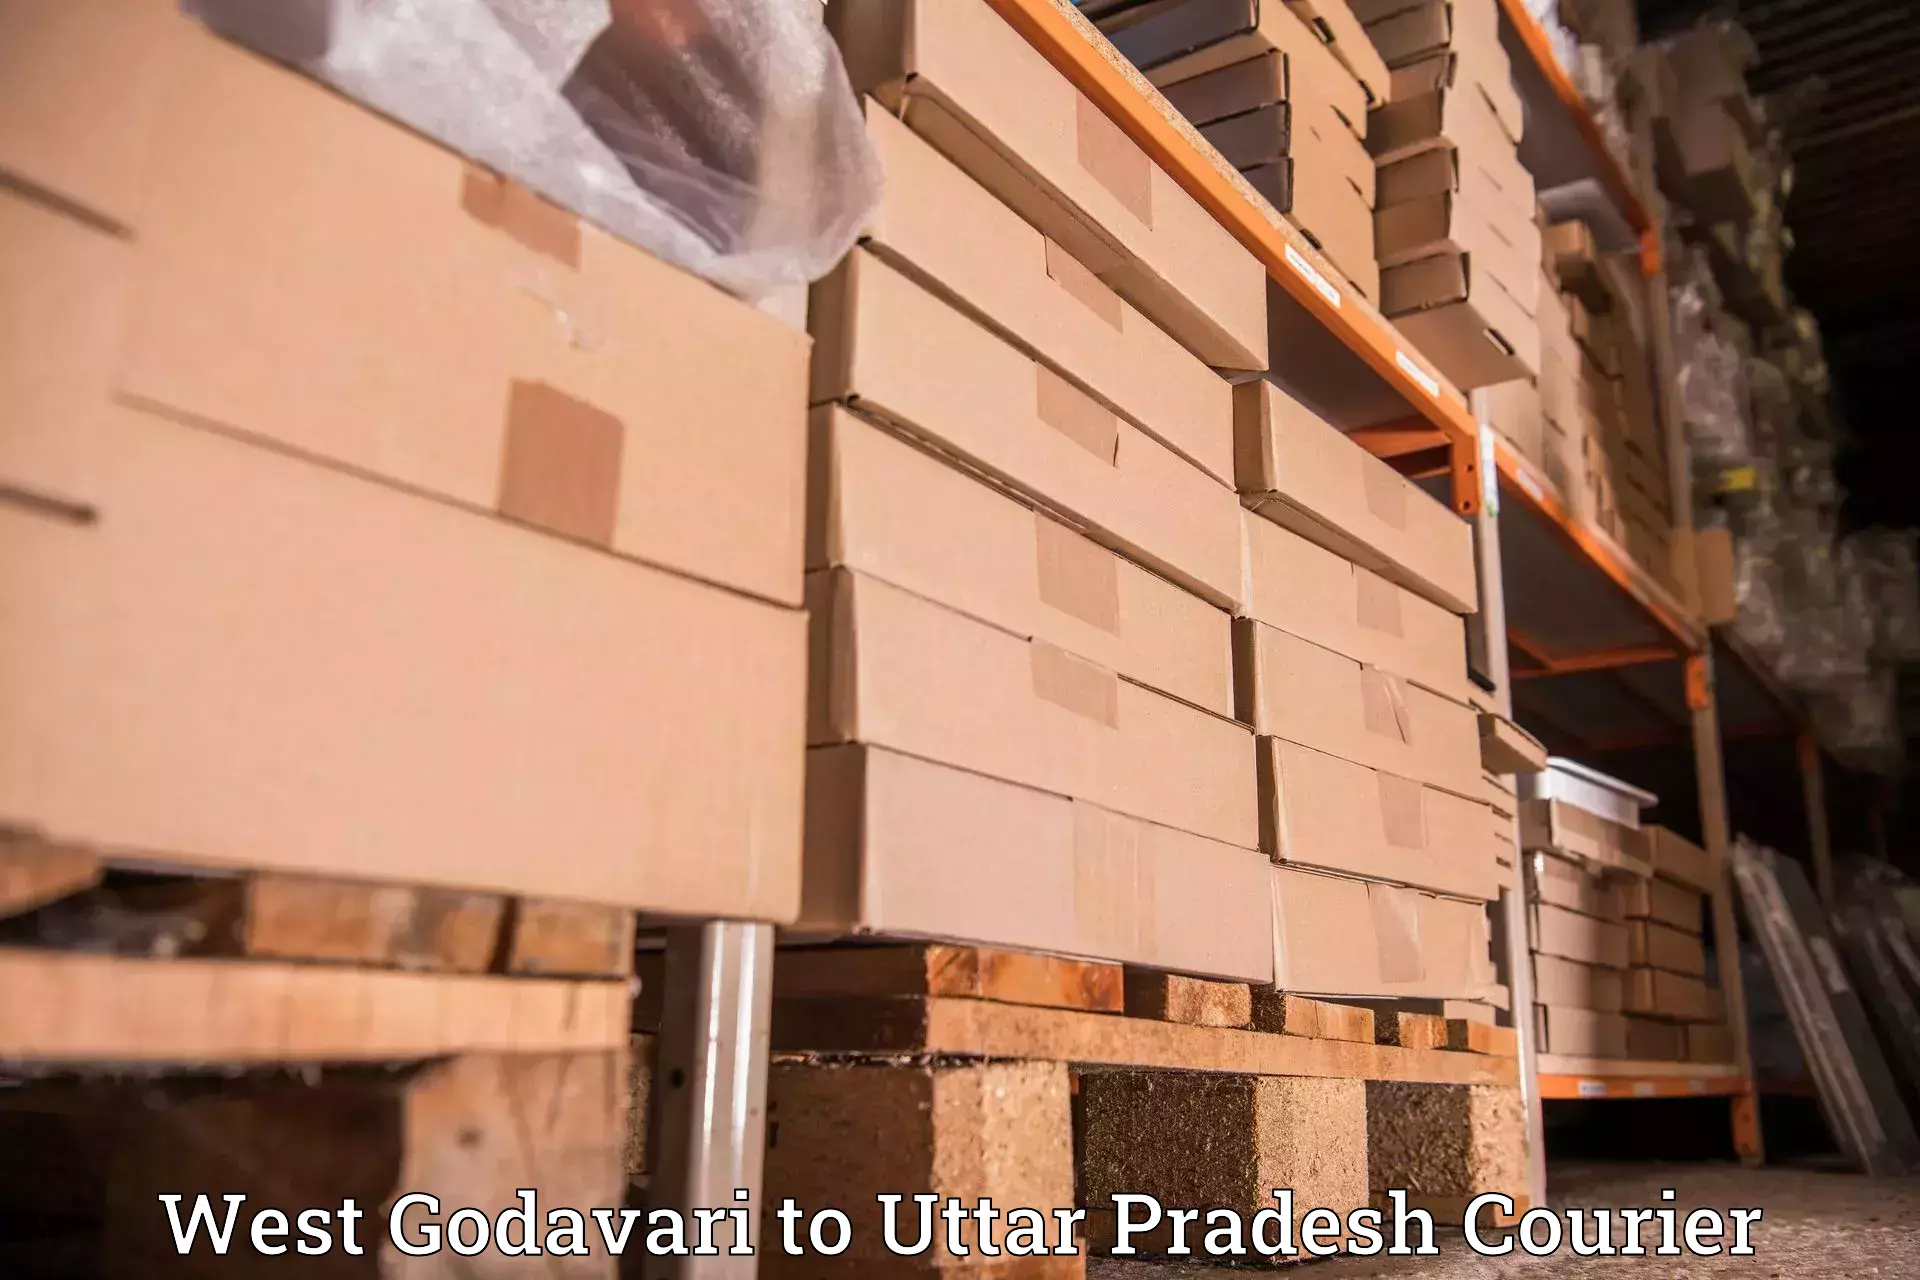 Reliable courier service in West Godavari to Aligarh Muslim University